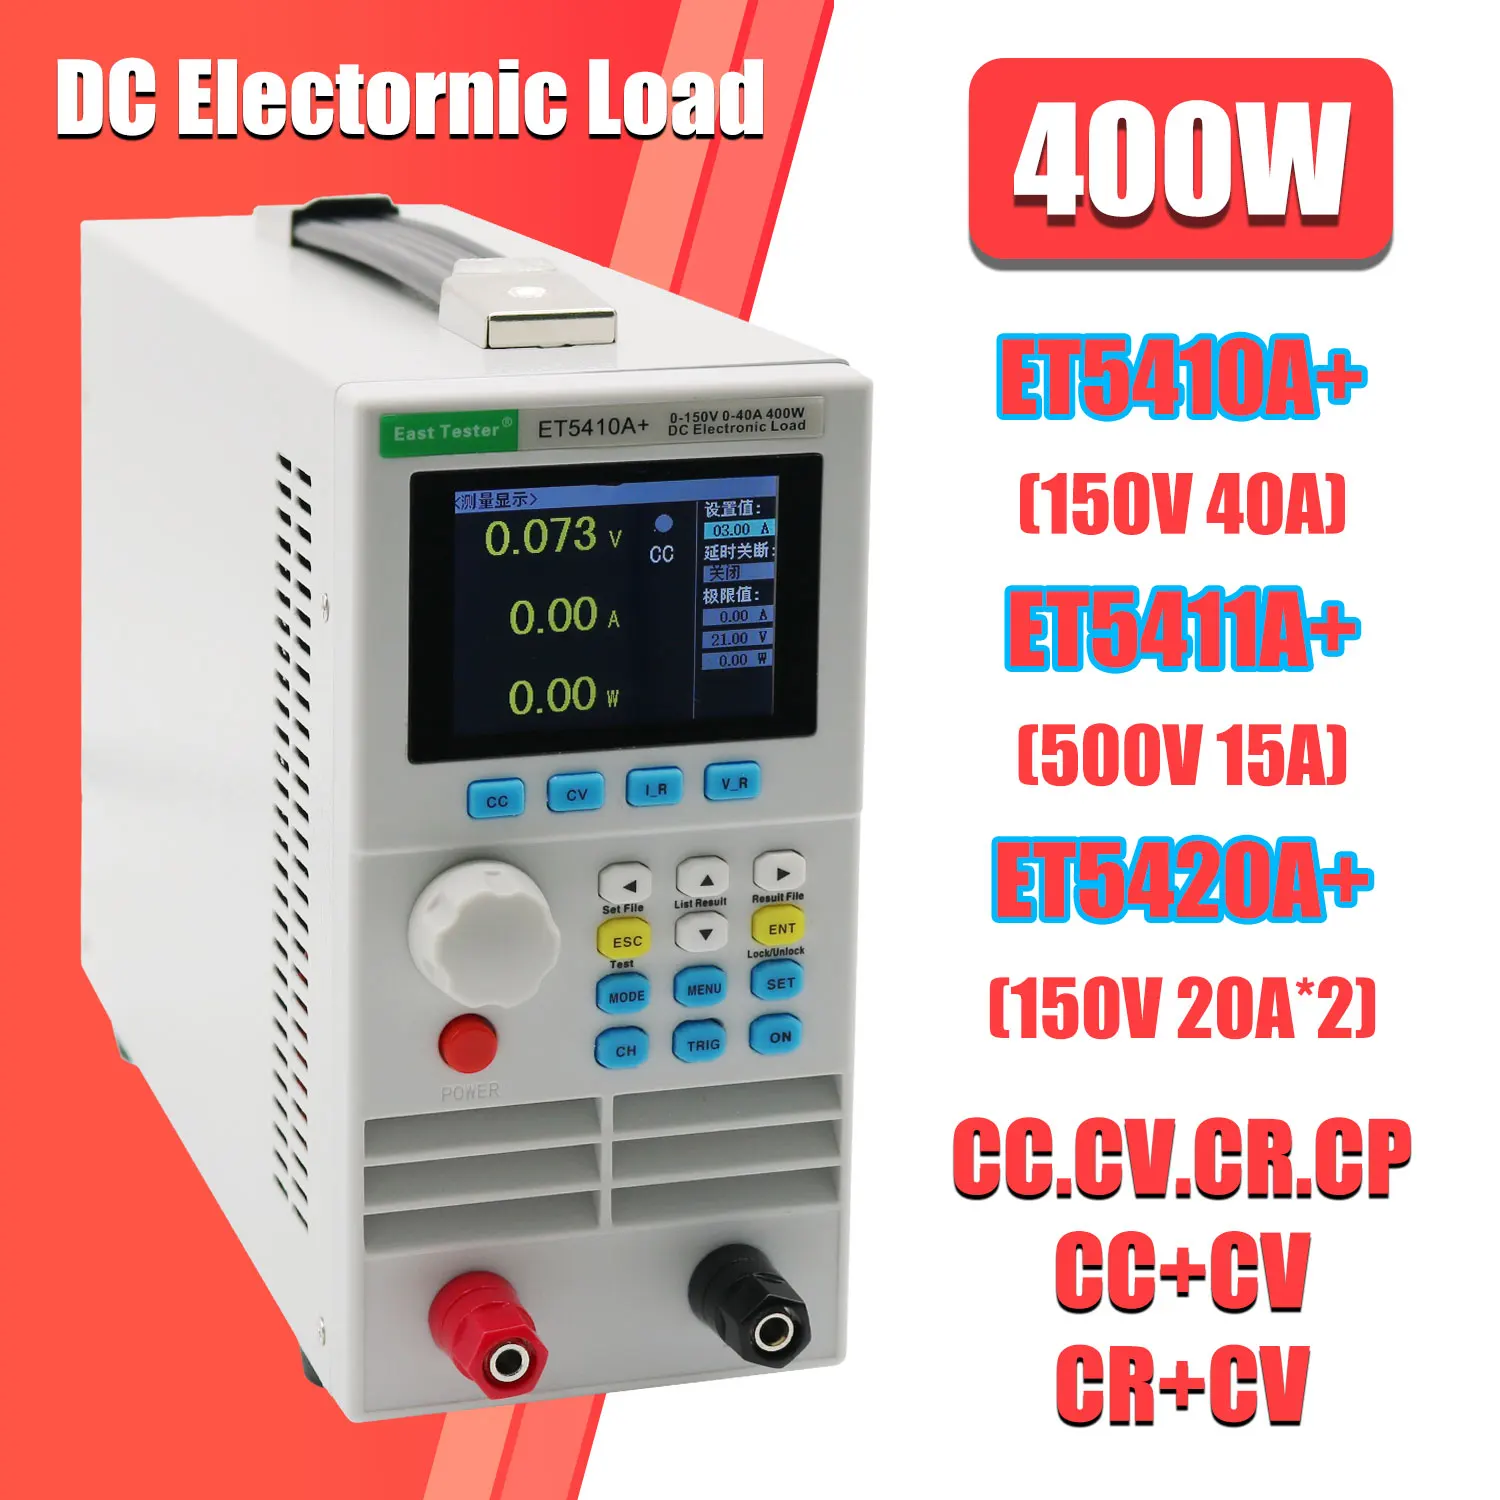 

DC Electronic Load Programmable ET5410A+ ET5420A+ USB Power Supply 500V40A 400W Digital Load Battery Tester EU & Russia Delivery